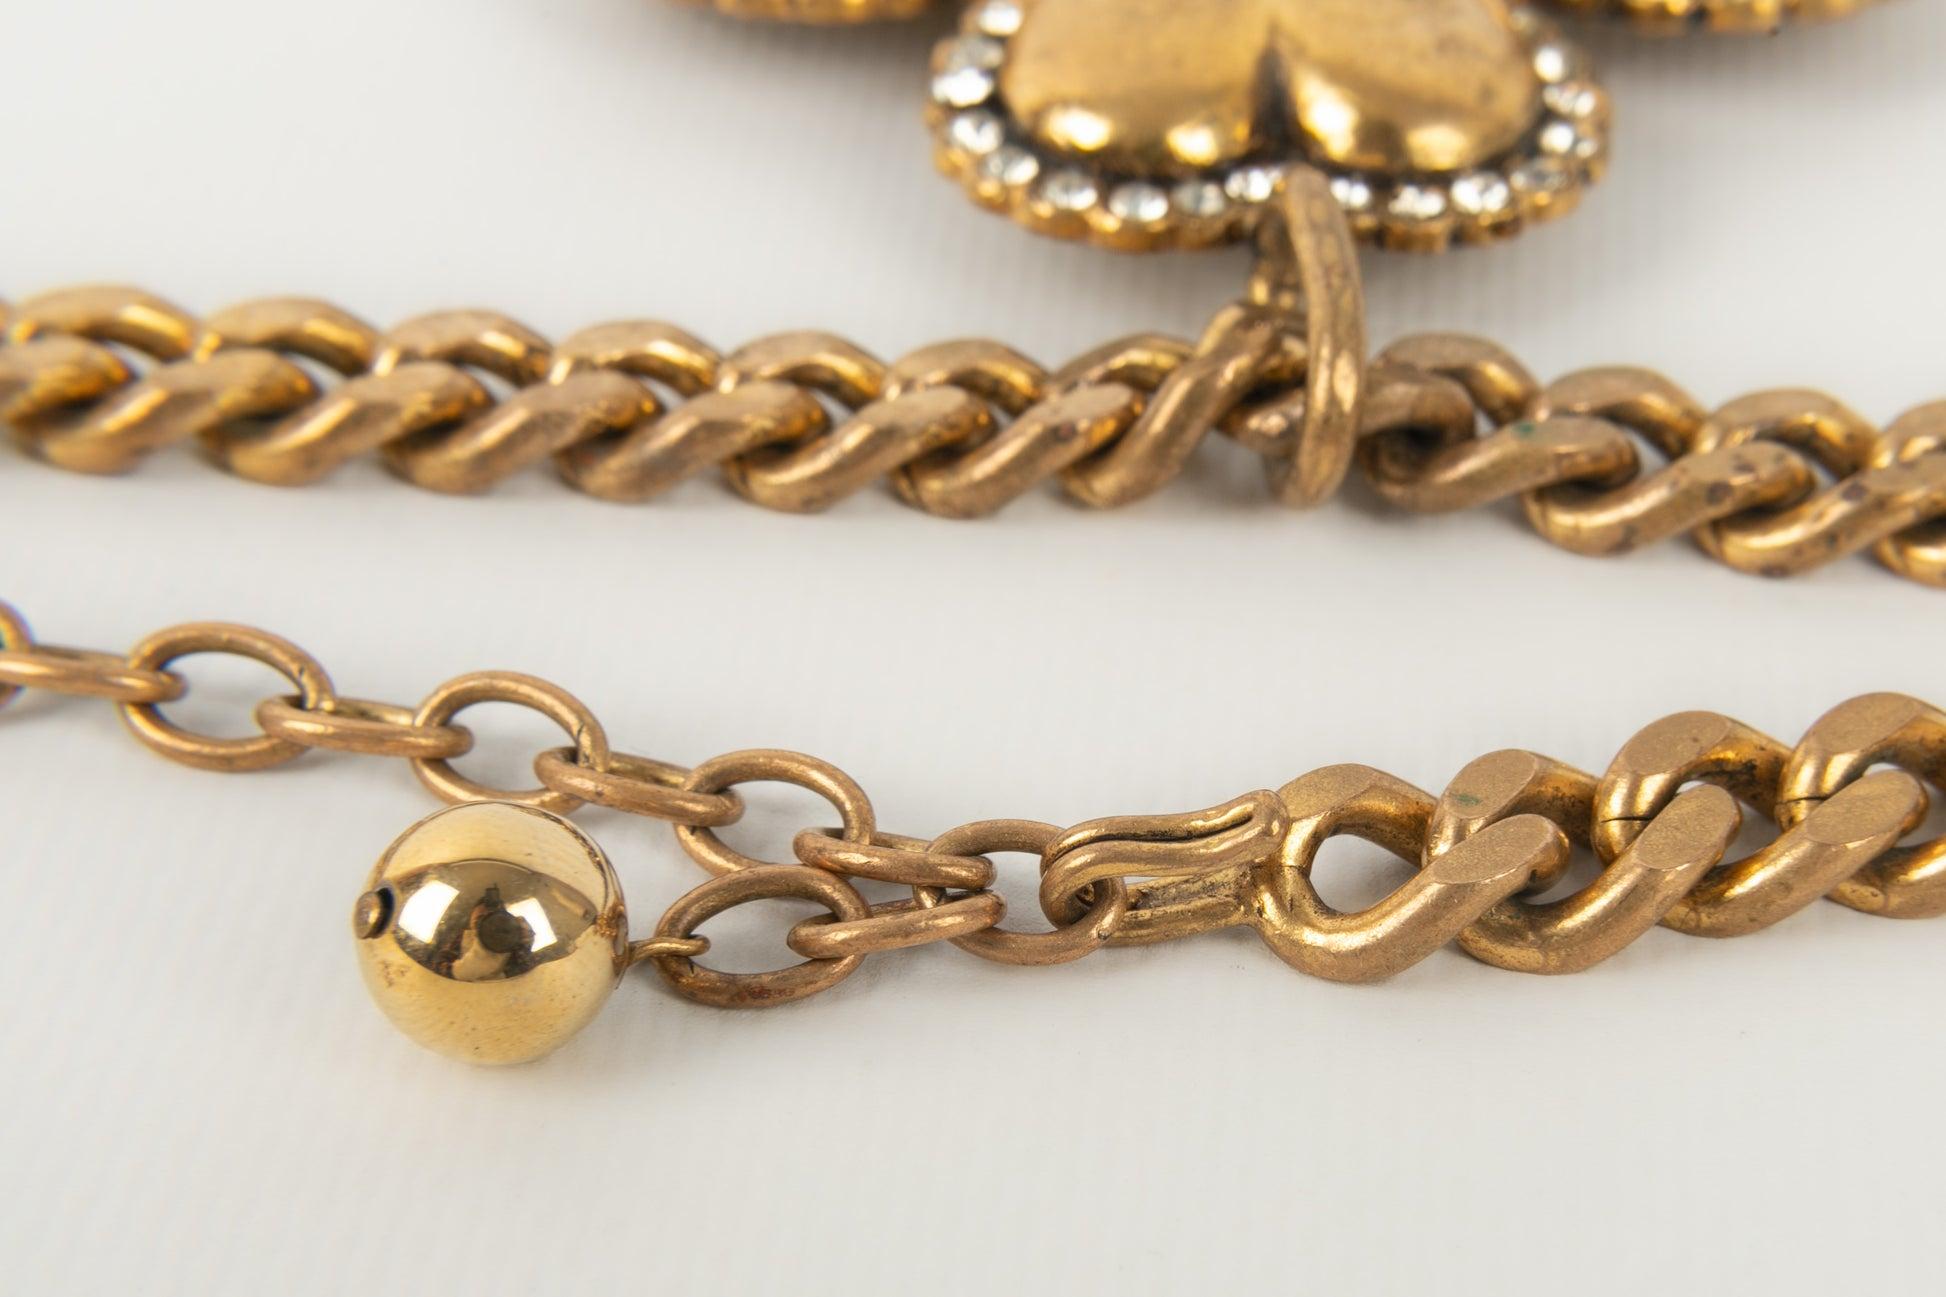 Chanel Golden Metal Necklace with a Four-leaf Clover-shaped Pendant, 1980s For Sale 1